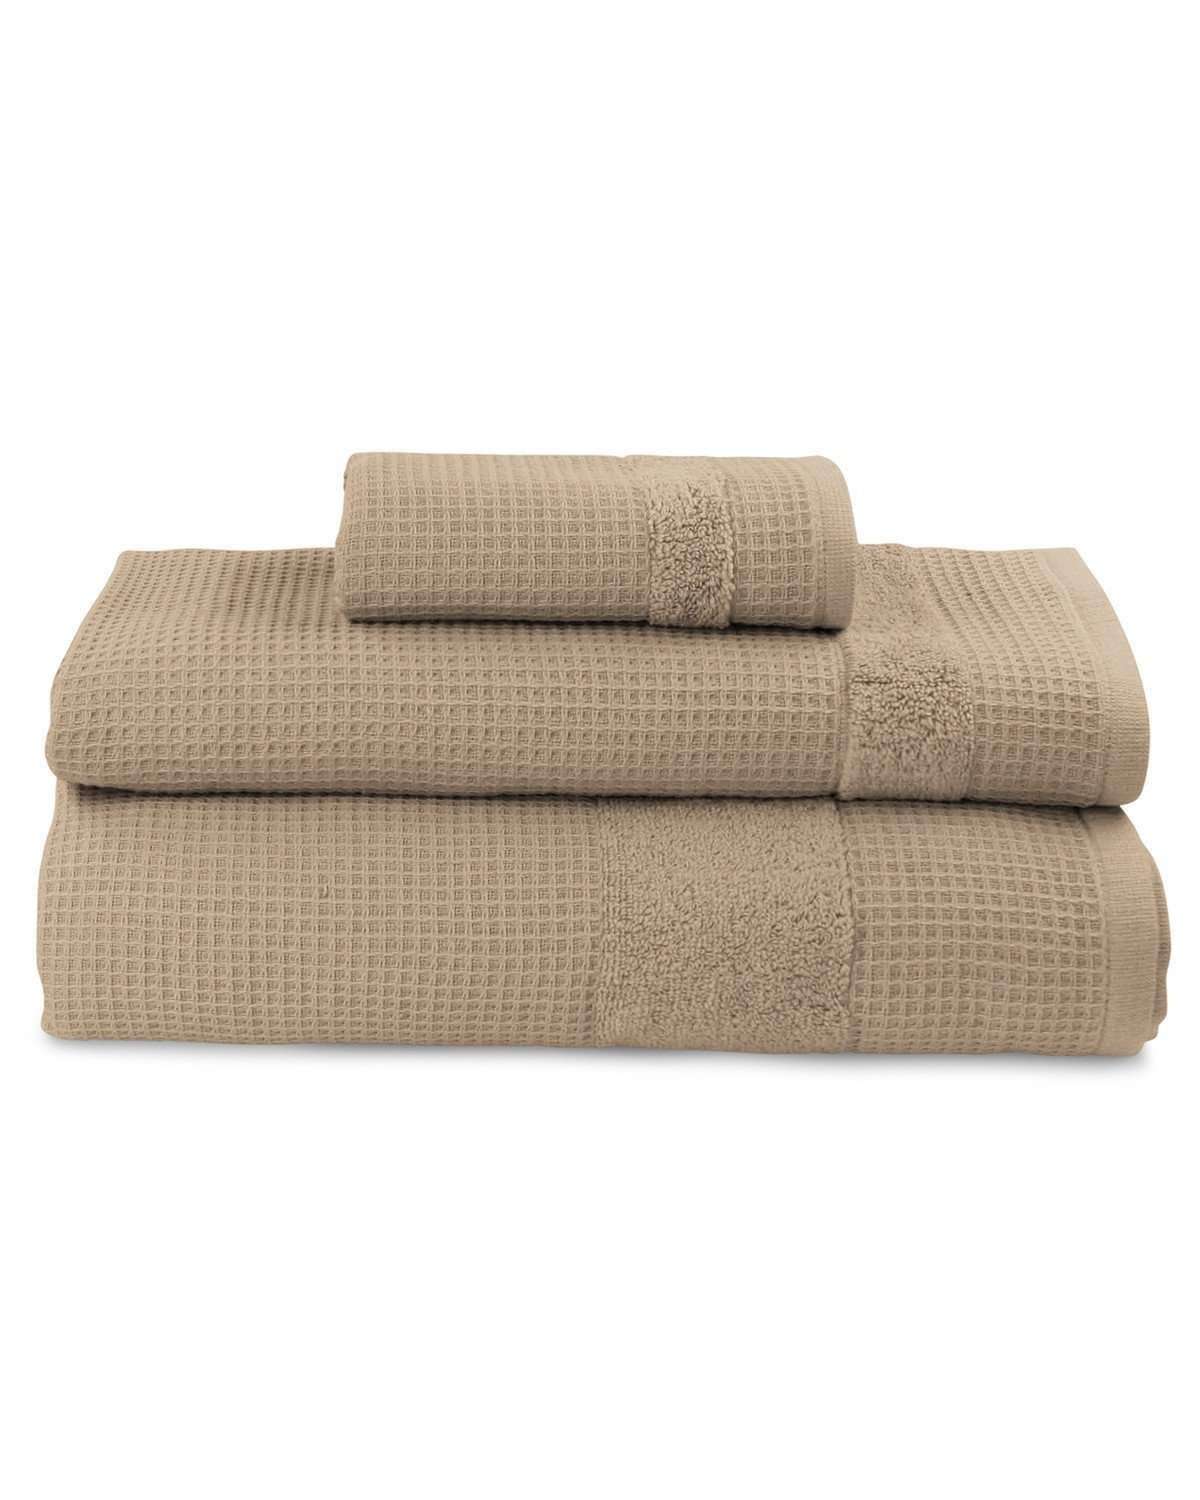 Buonaparte Egyptian Cotton Waffle Luxury Spa Towel Collection - Luxor Linens 